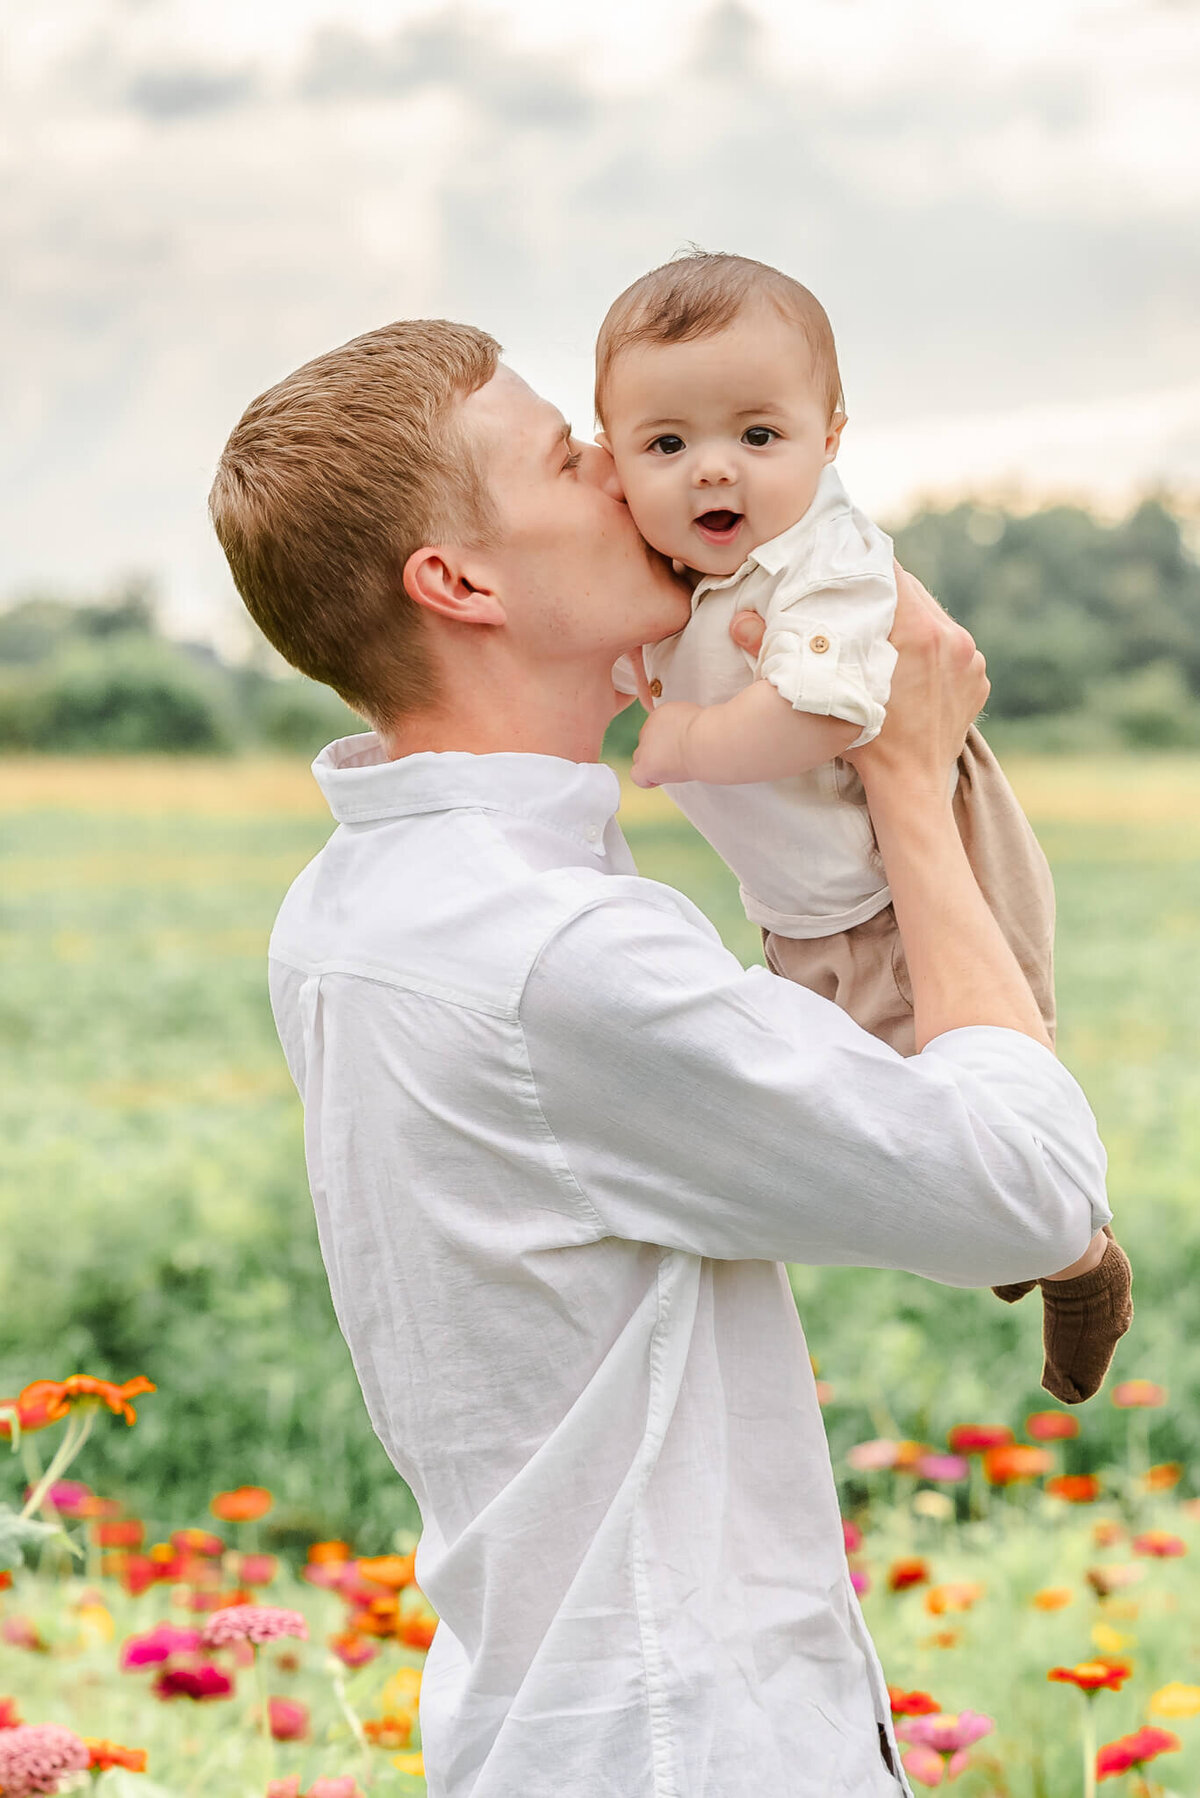 A man wearing a white shirt holds up his infant son and gives him a kiss on the cheek. Image by Justine Renee Photography near Virginia Beach.